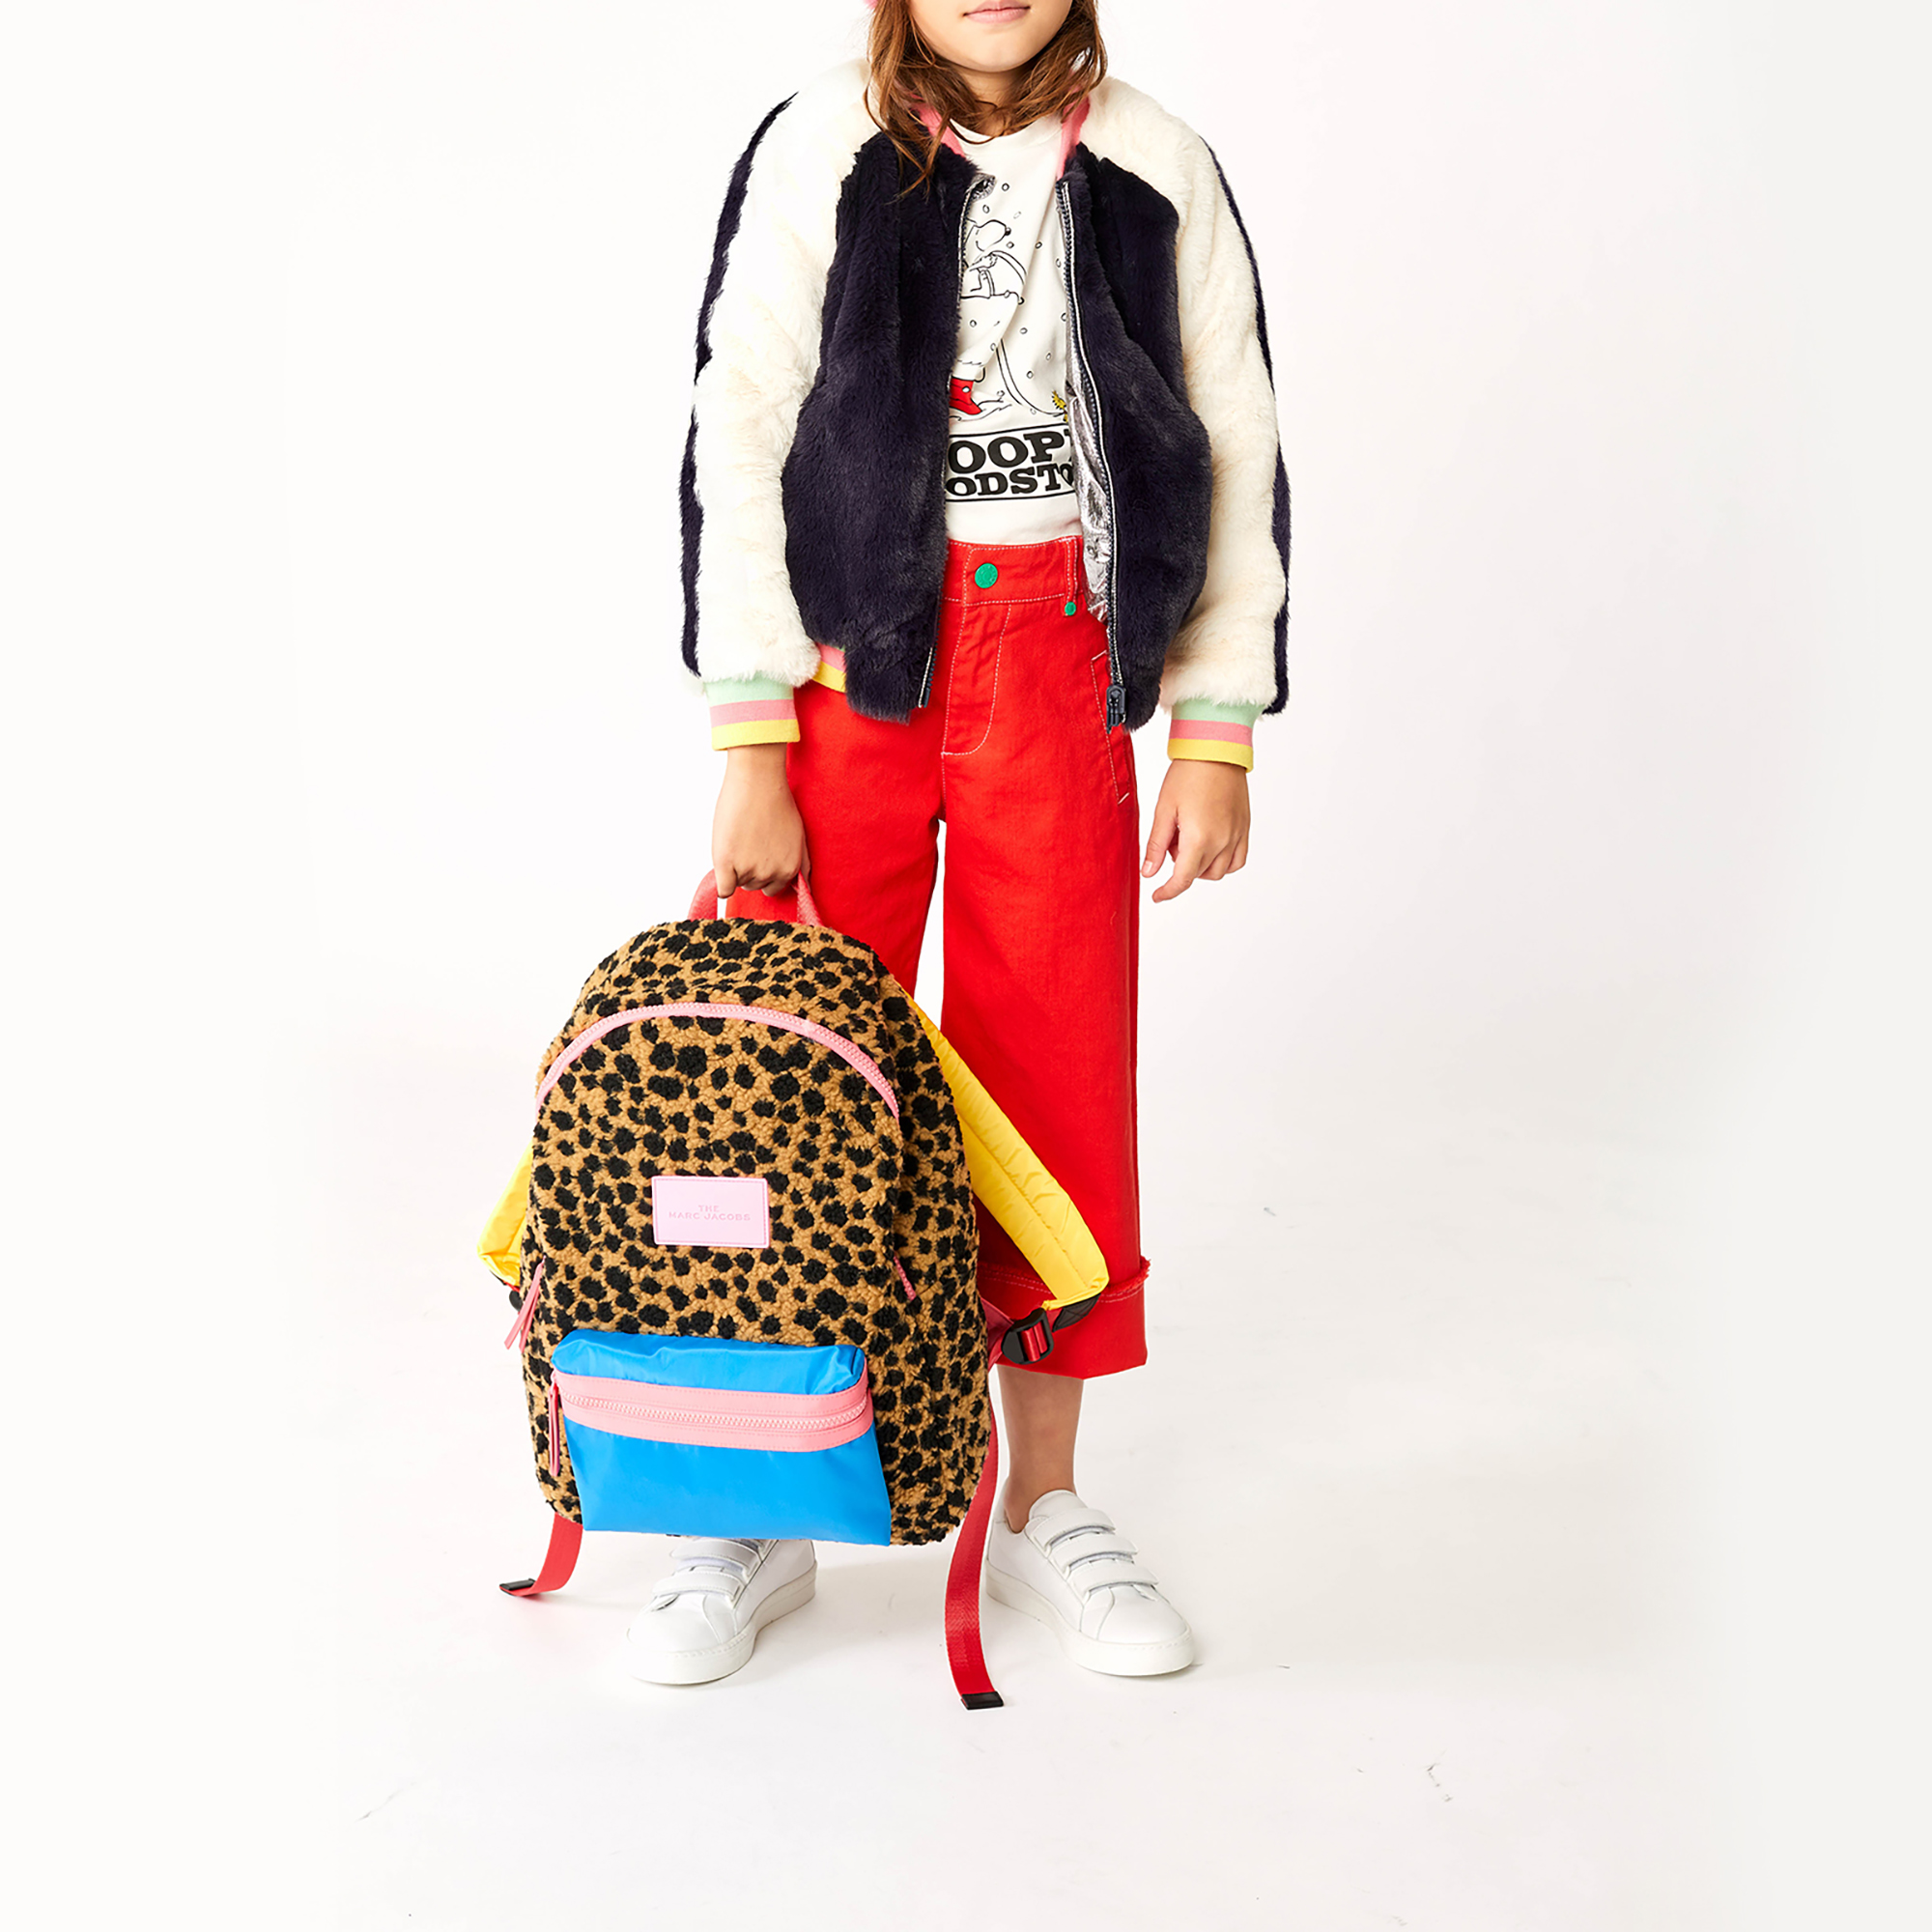 Reversible jacket MARC JACOBS for GIRL